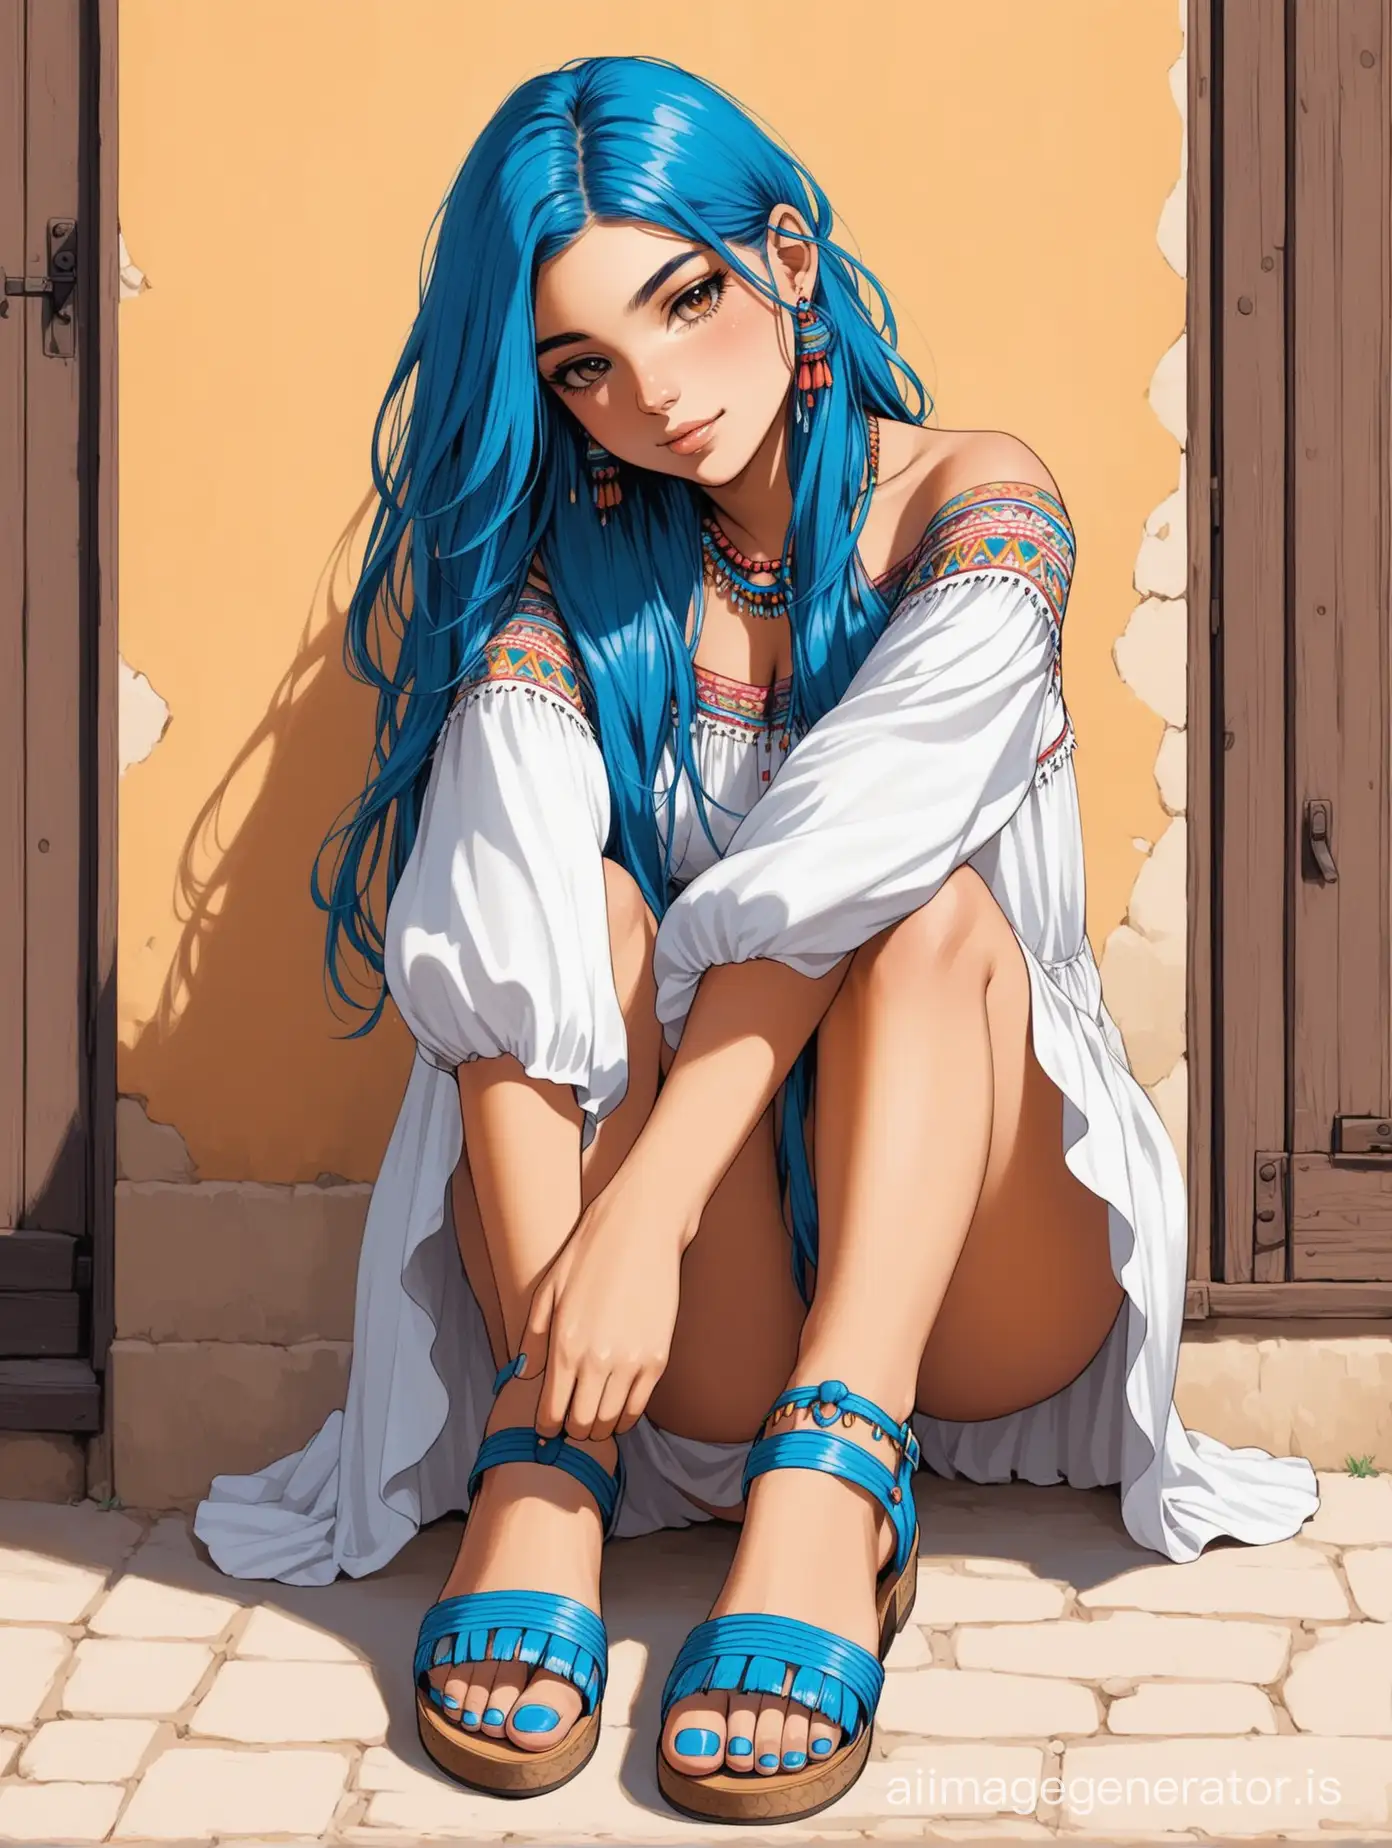 Bohemian-Gypsy-Girl-with-Vibrant-Blue-Hair-in-Closed-Toe-Sandals